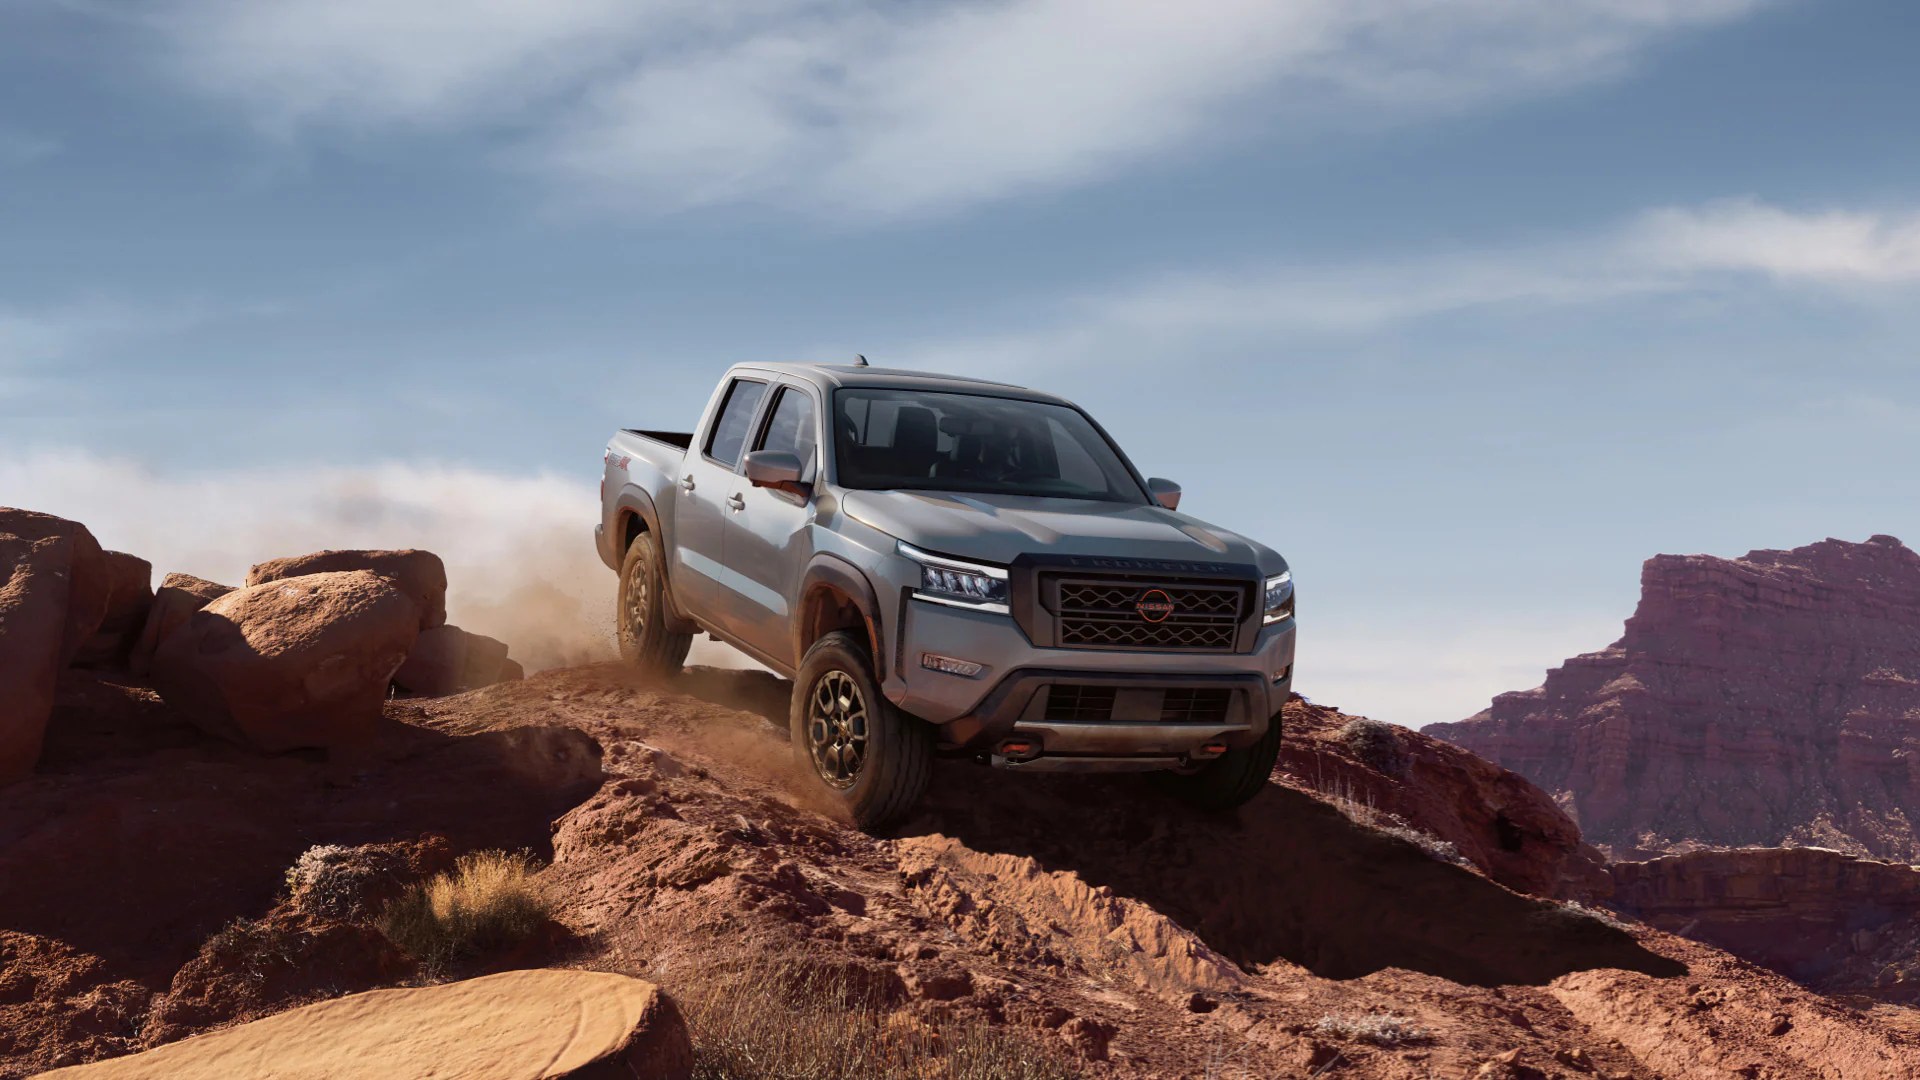 The 2022 Nissan Frontier is a mid-size truck with a standard V6 engine